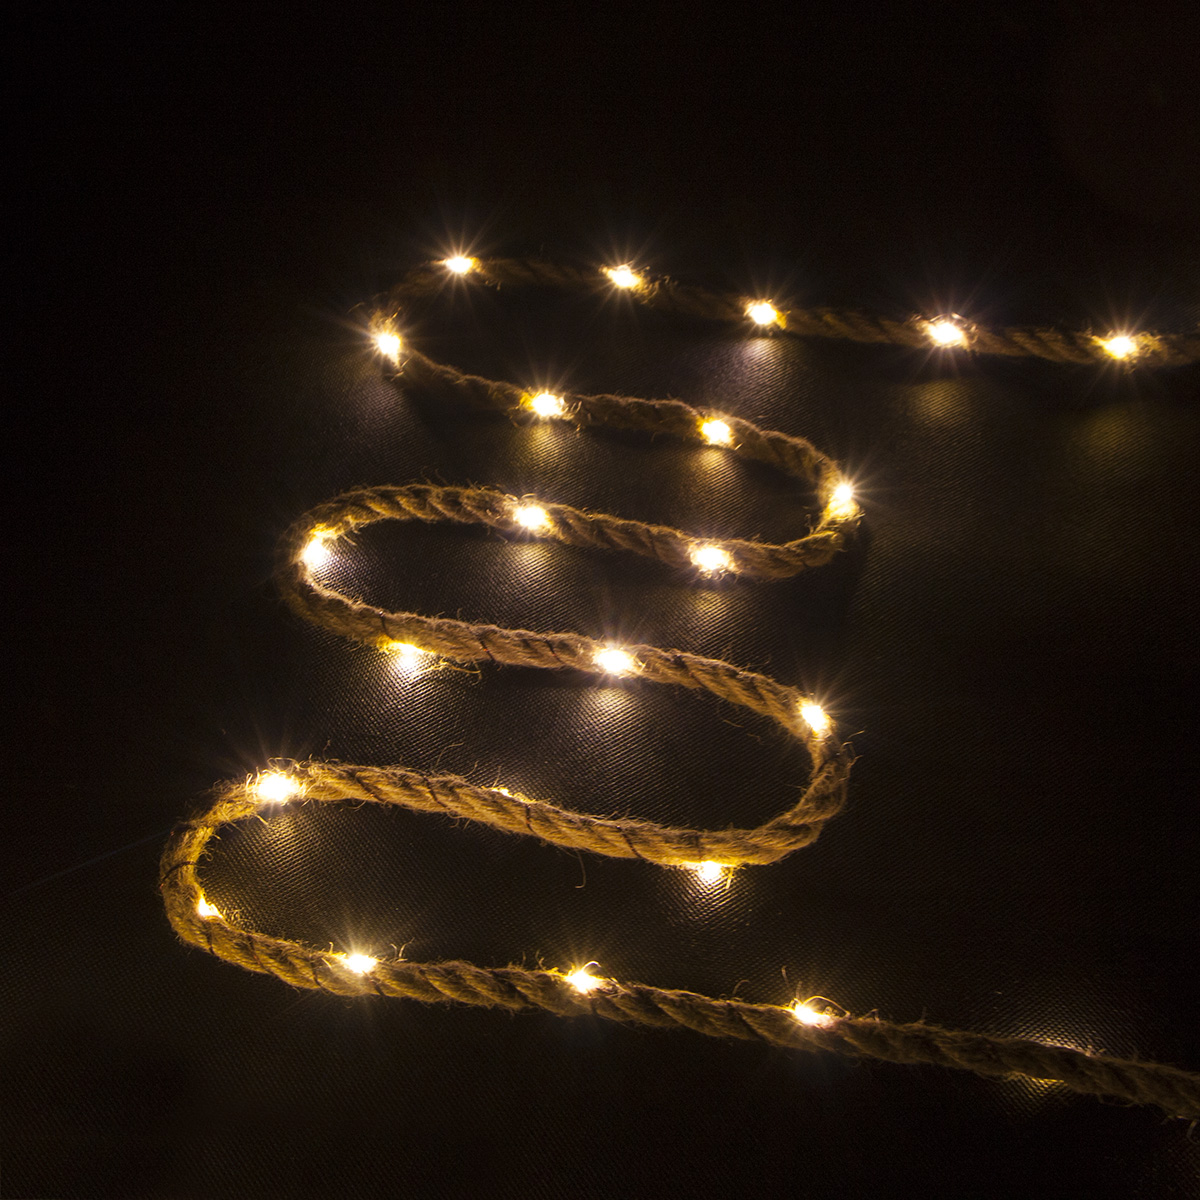 Battery Operated LED Rope Lights